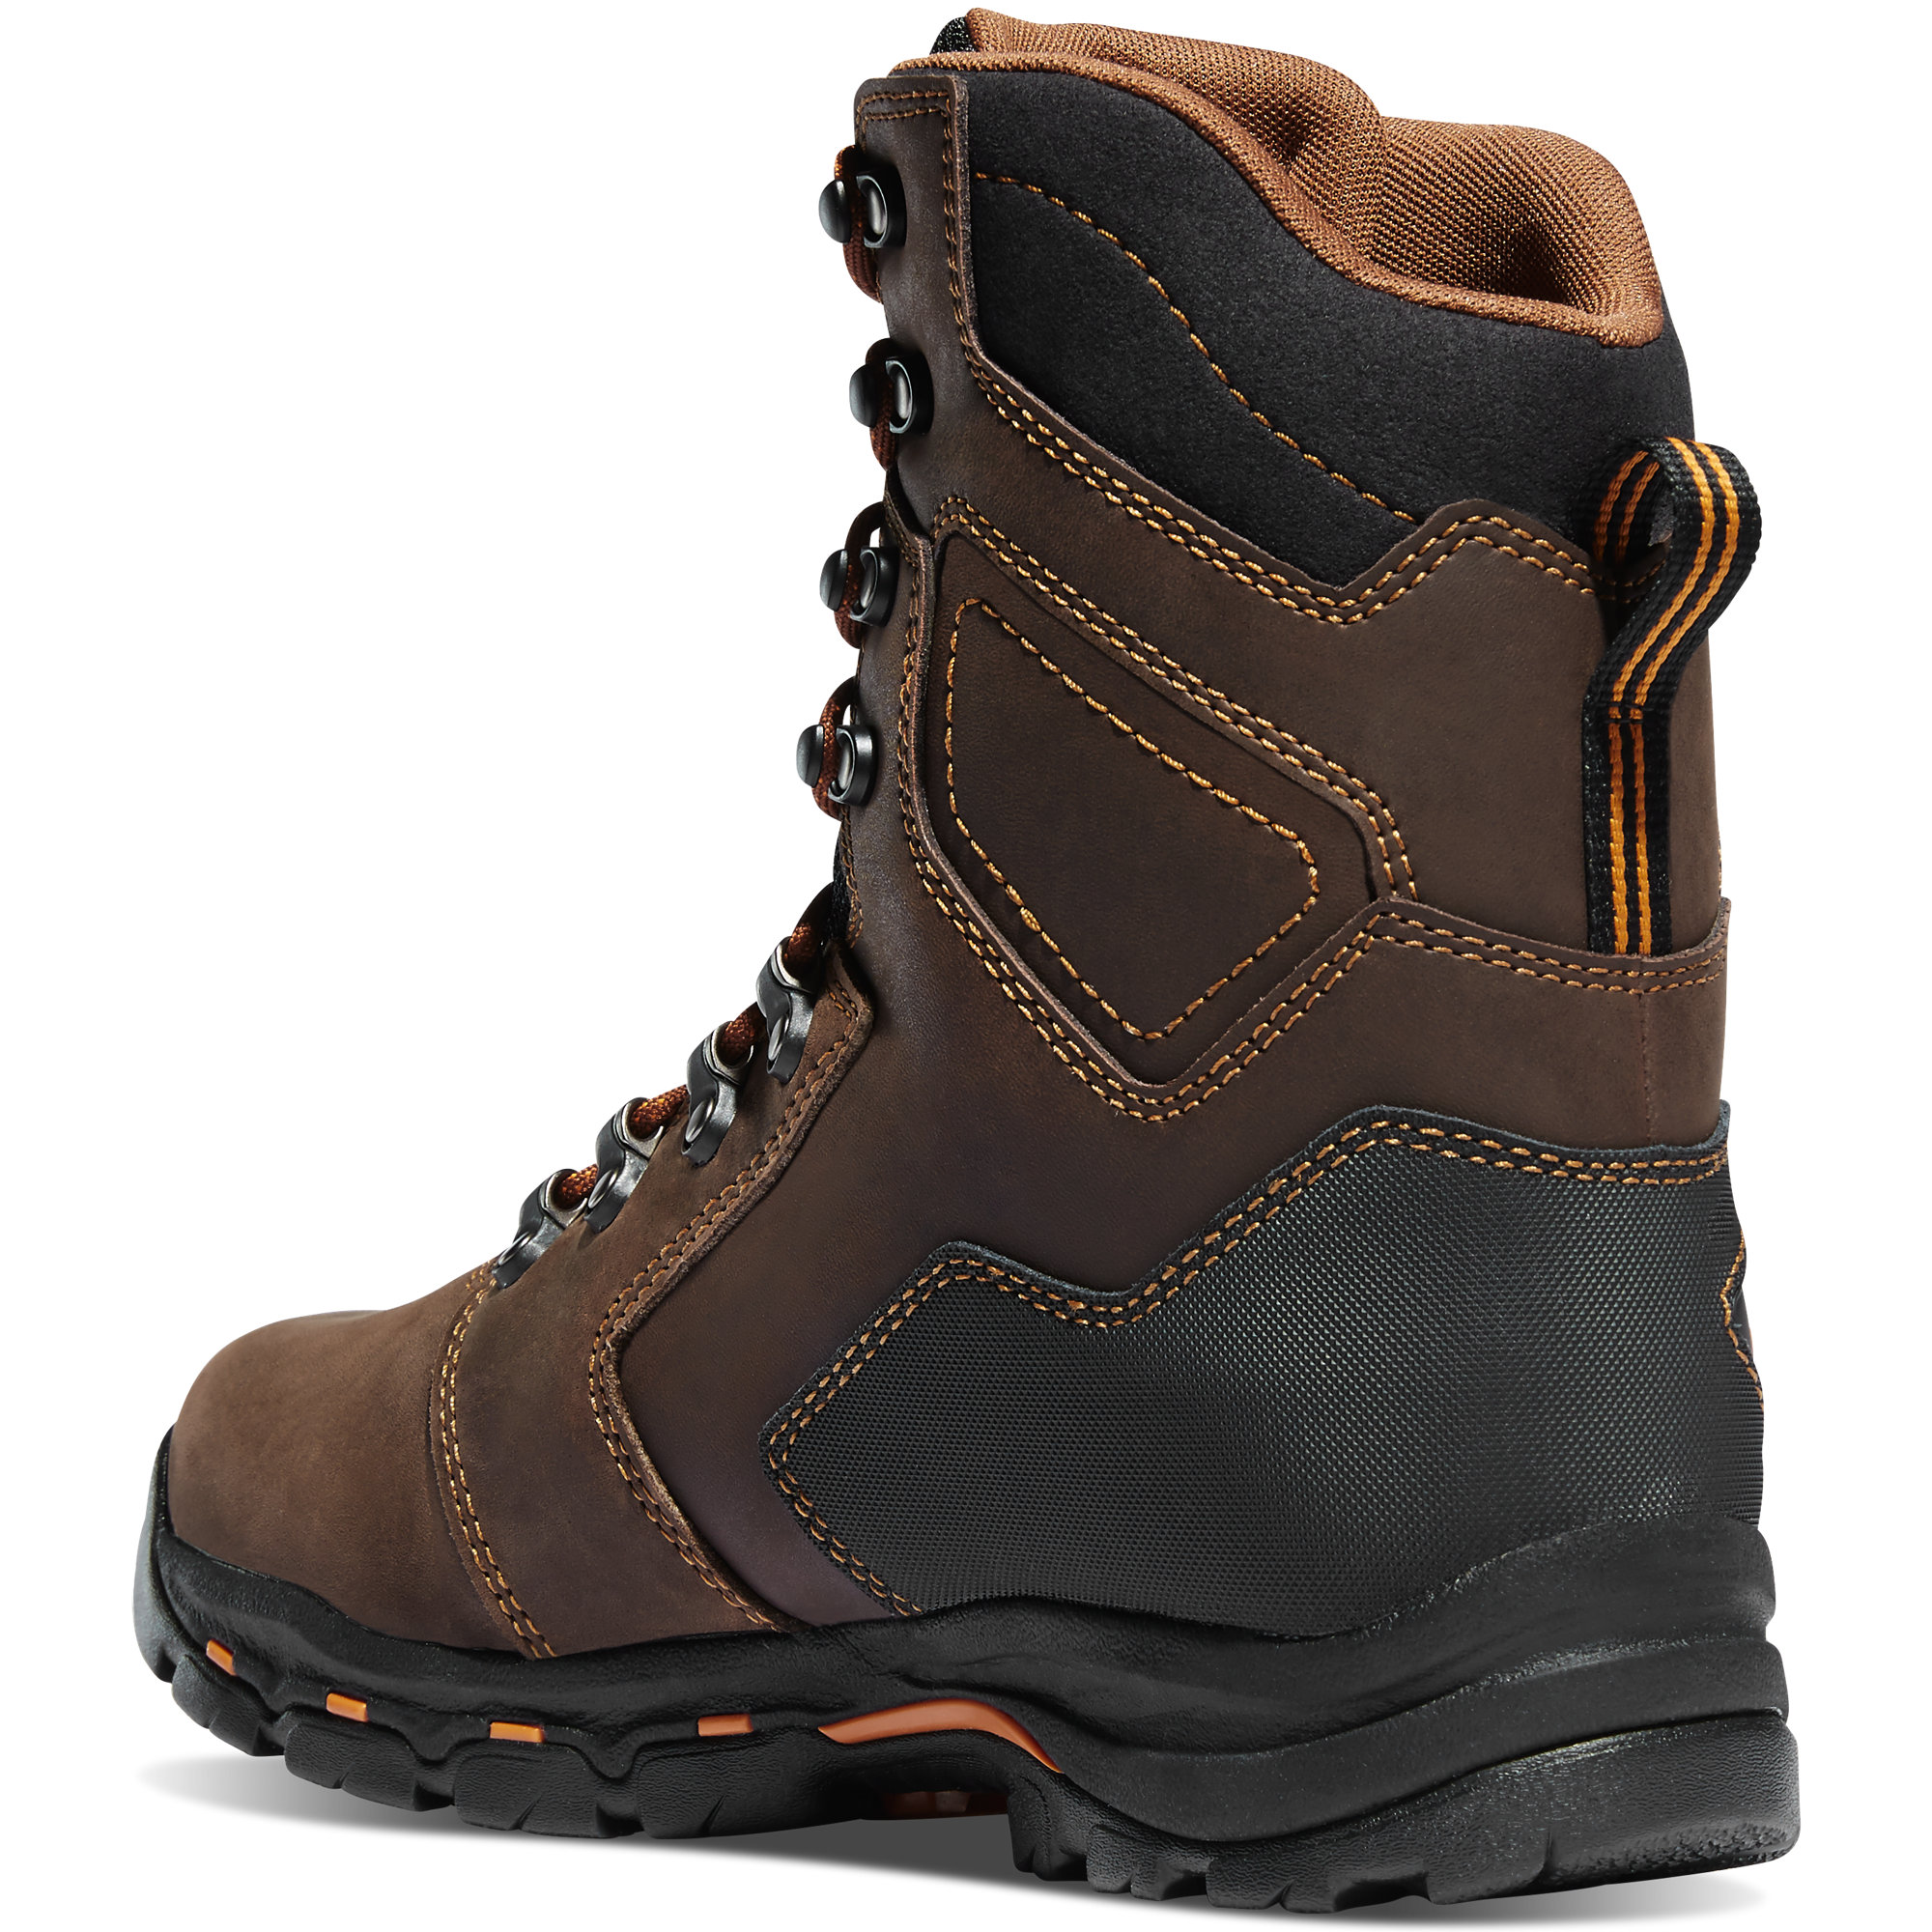 LaCrosse Men's Vicious 8 Inch Insulated 400G Composite Toe from Columbia Safety